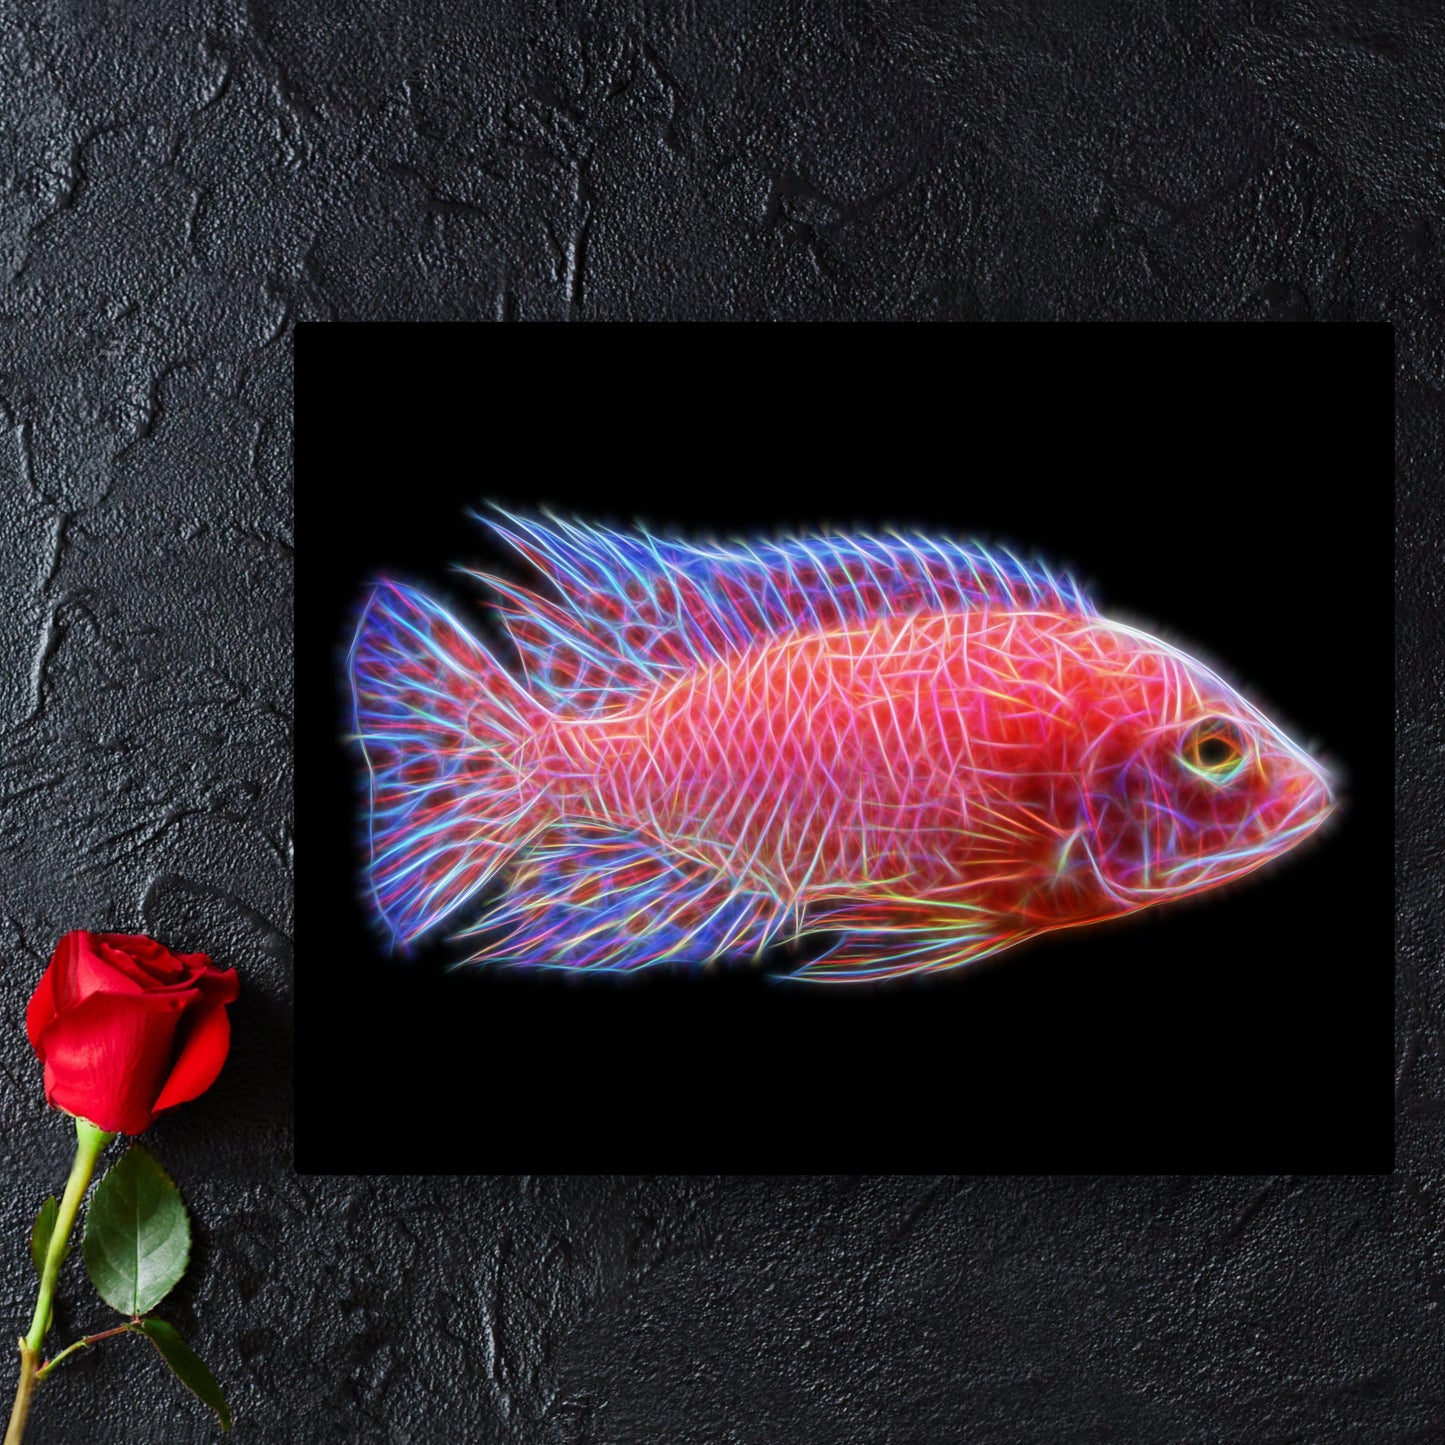 Dragon Blood Peacock Cichlid Metal Wall Plaque with Stunning Fractal Art Design. Aulonocara Sp